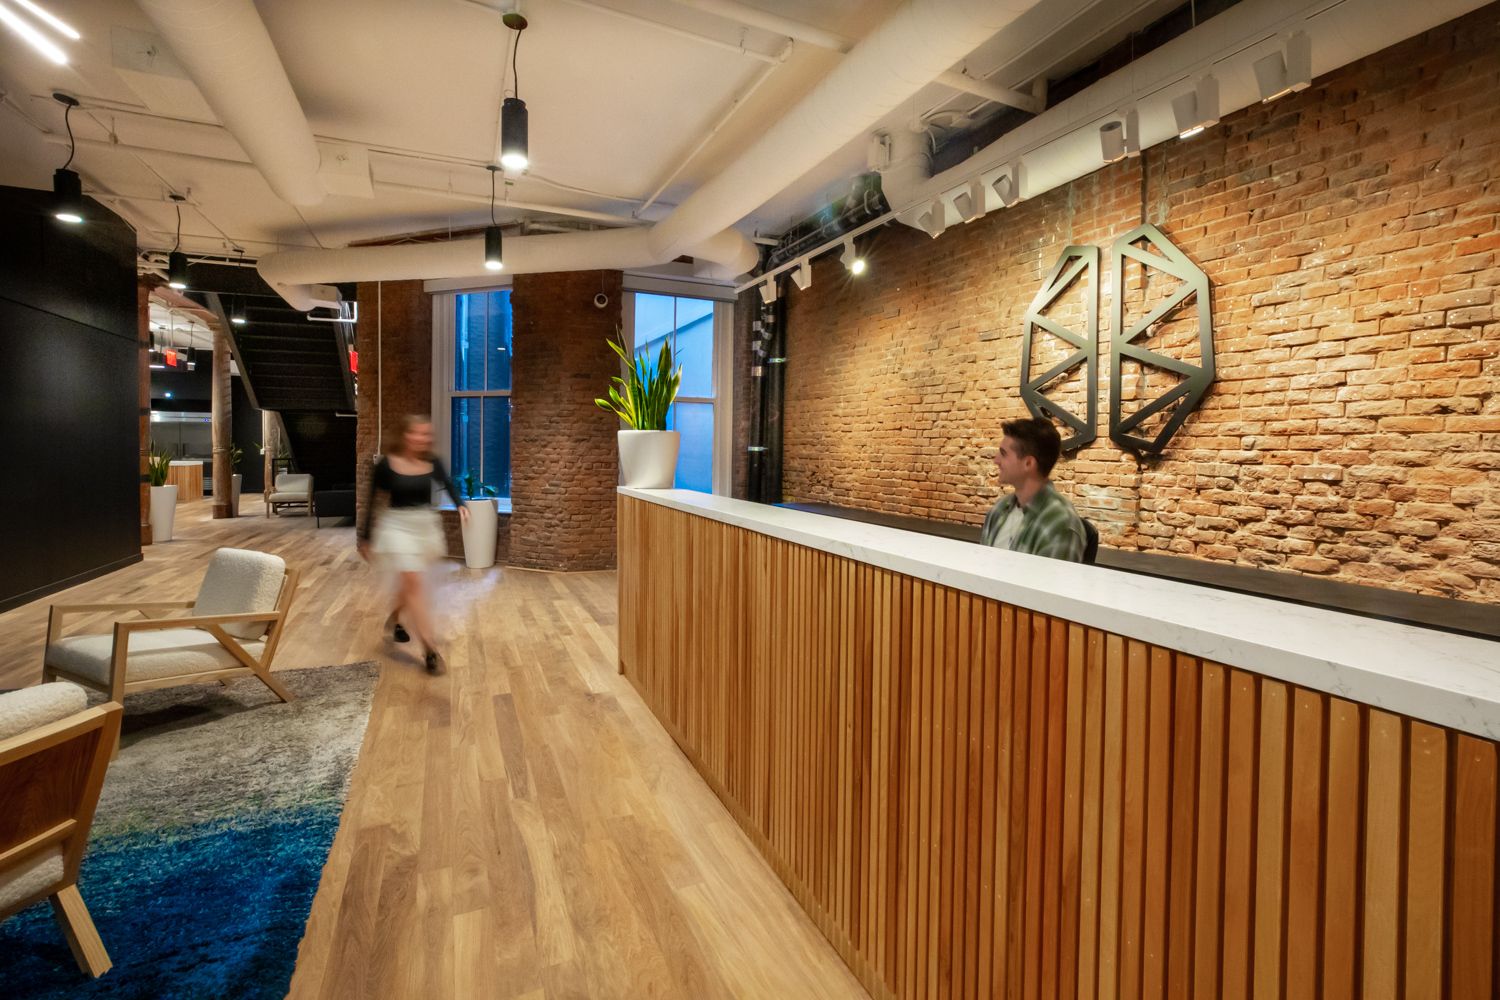 The newly expanded BrainStation campus in New York